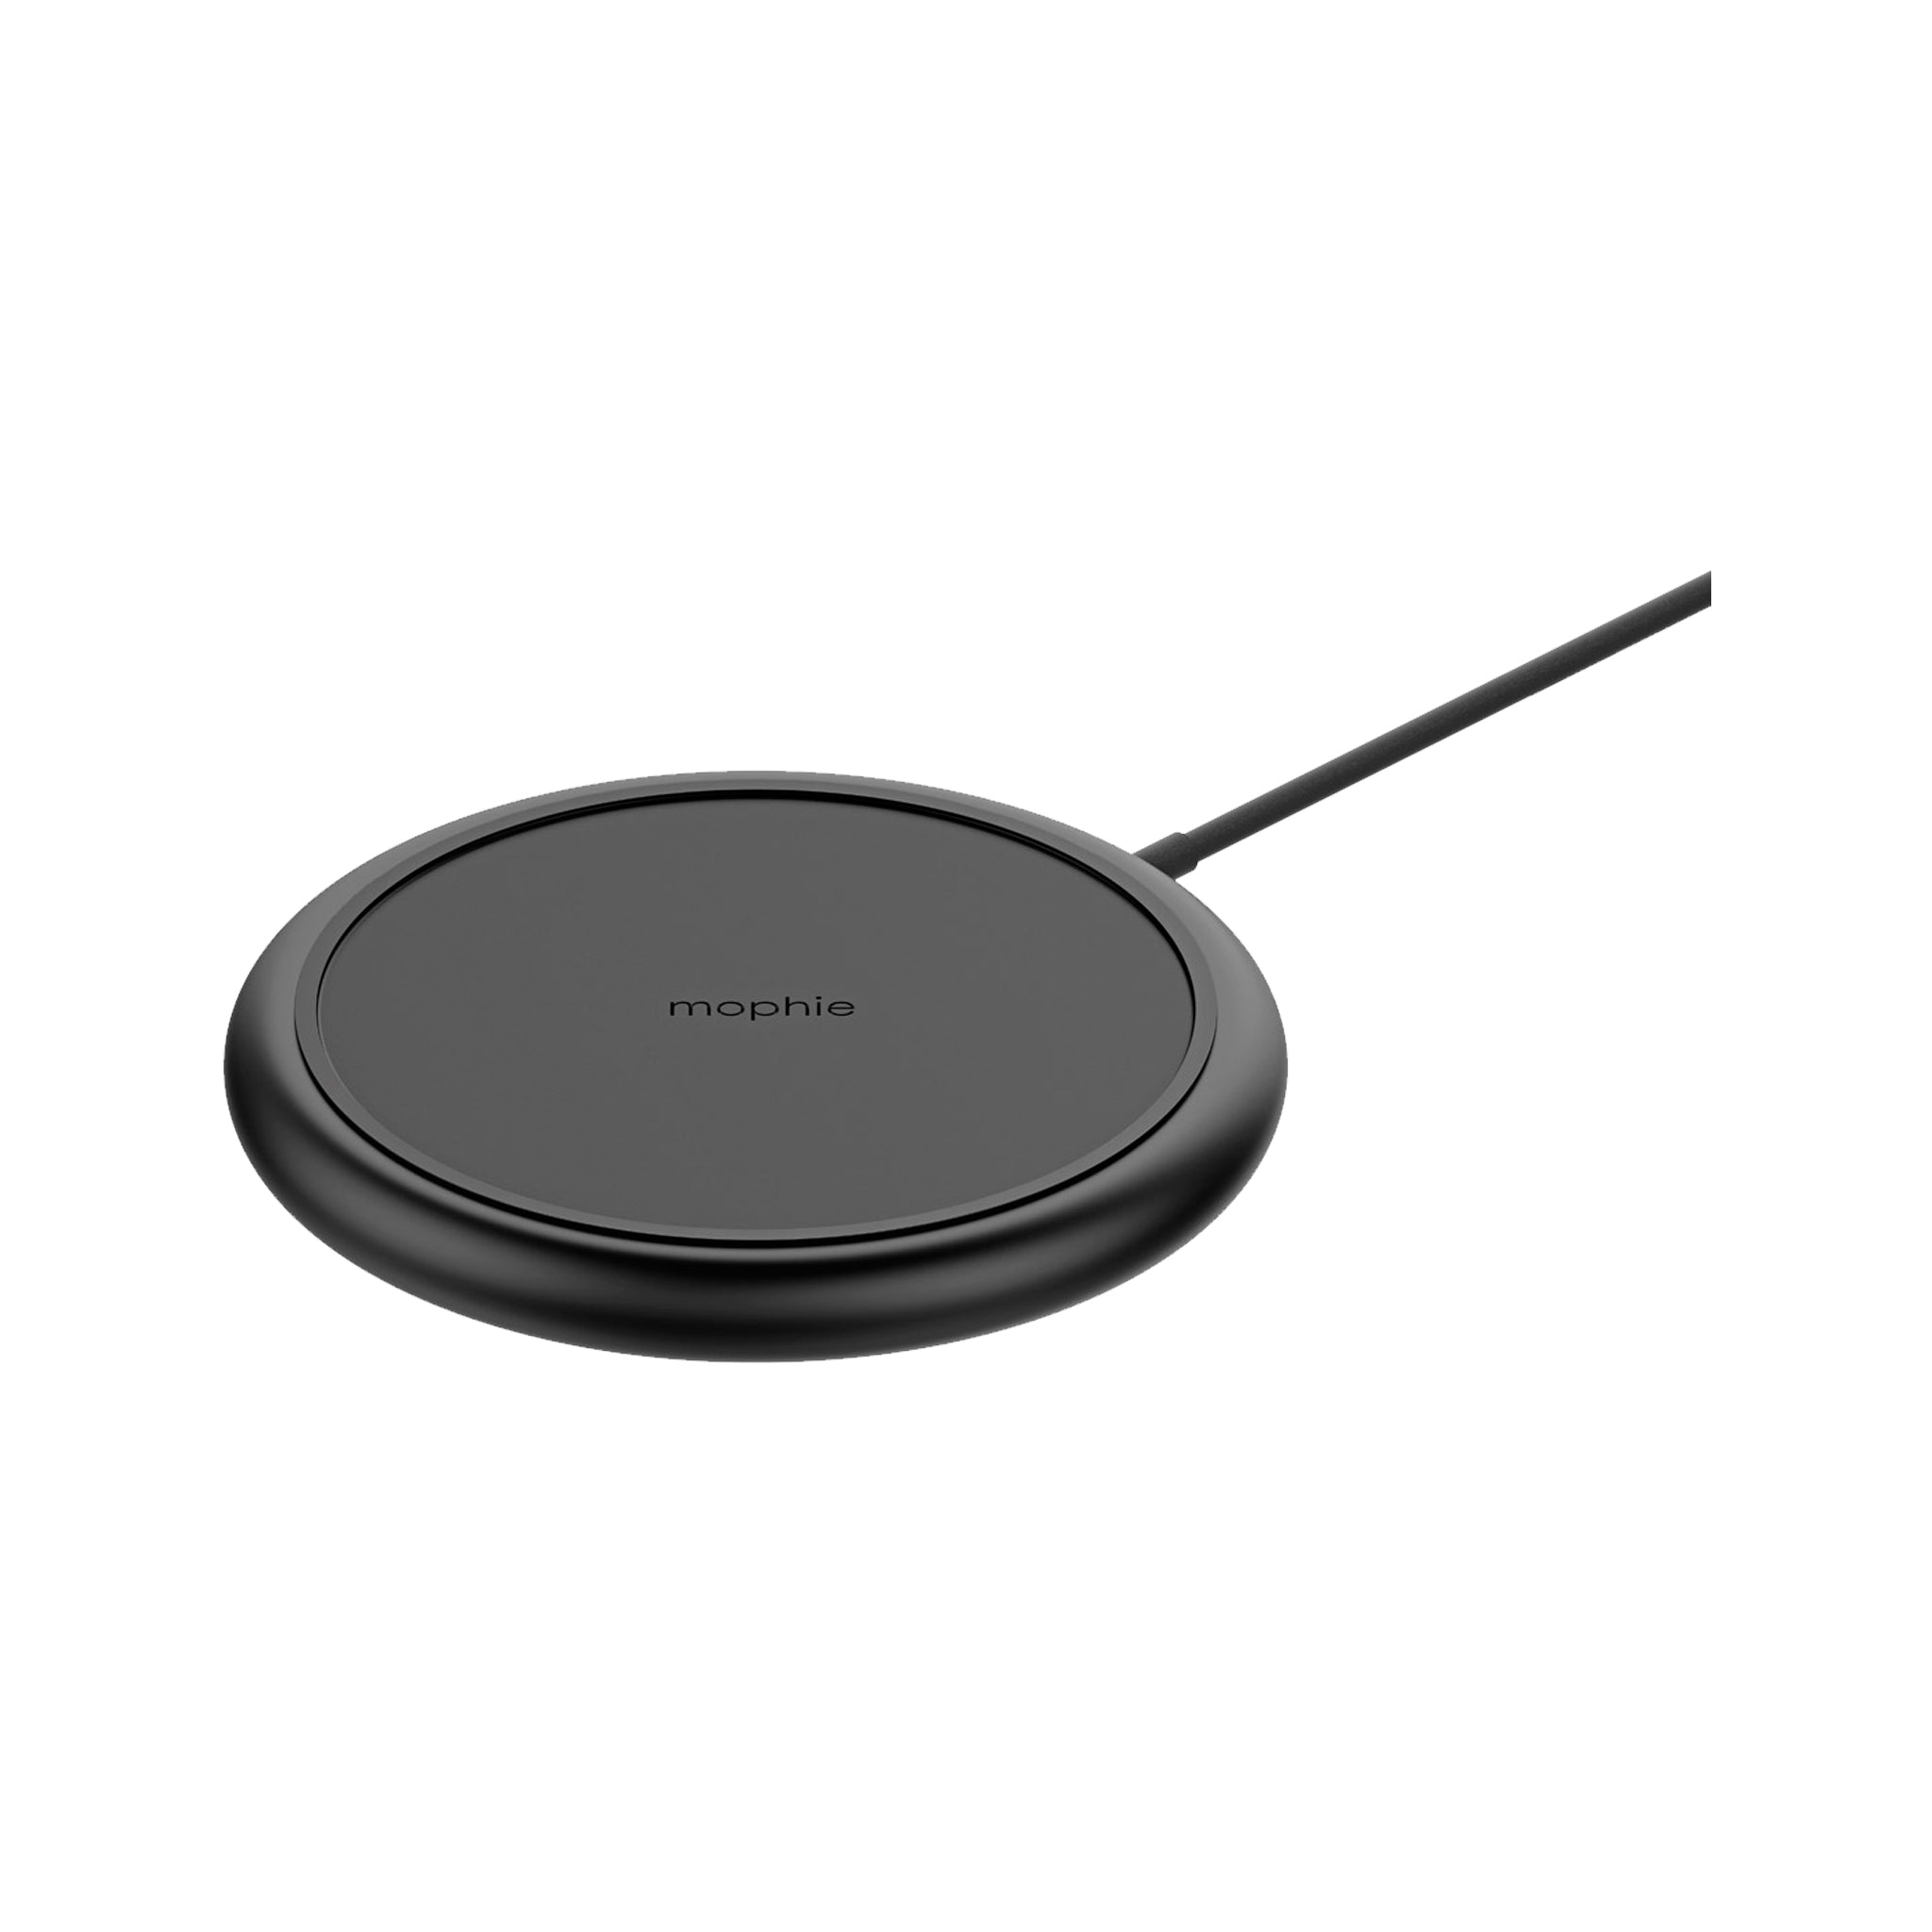 Mophie - Charge Stream Pad Plus Wireless Charging Pad 10w - Black